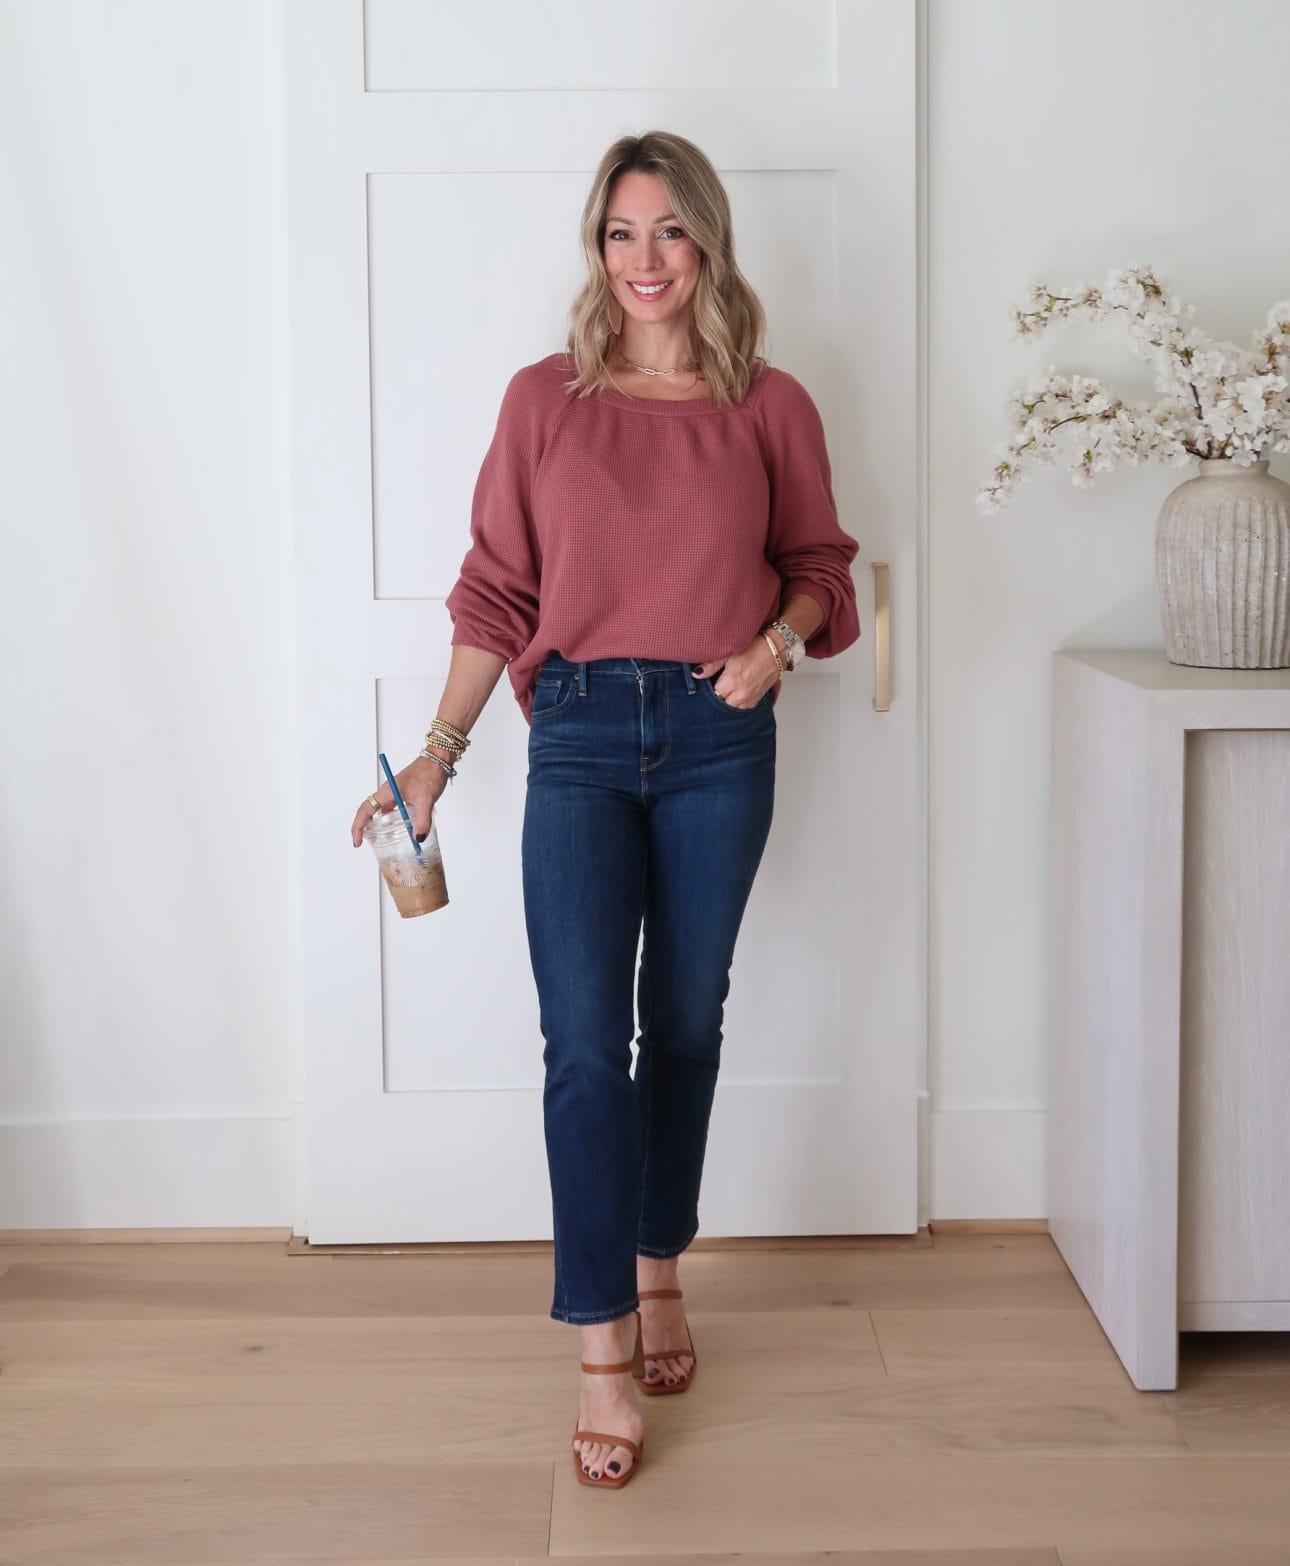 Waffle Knit Square Neck Top, Jeans, Heels